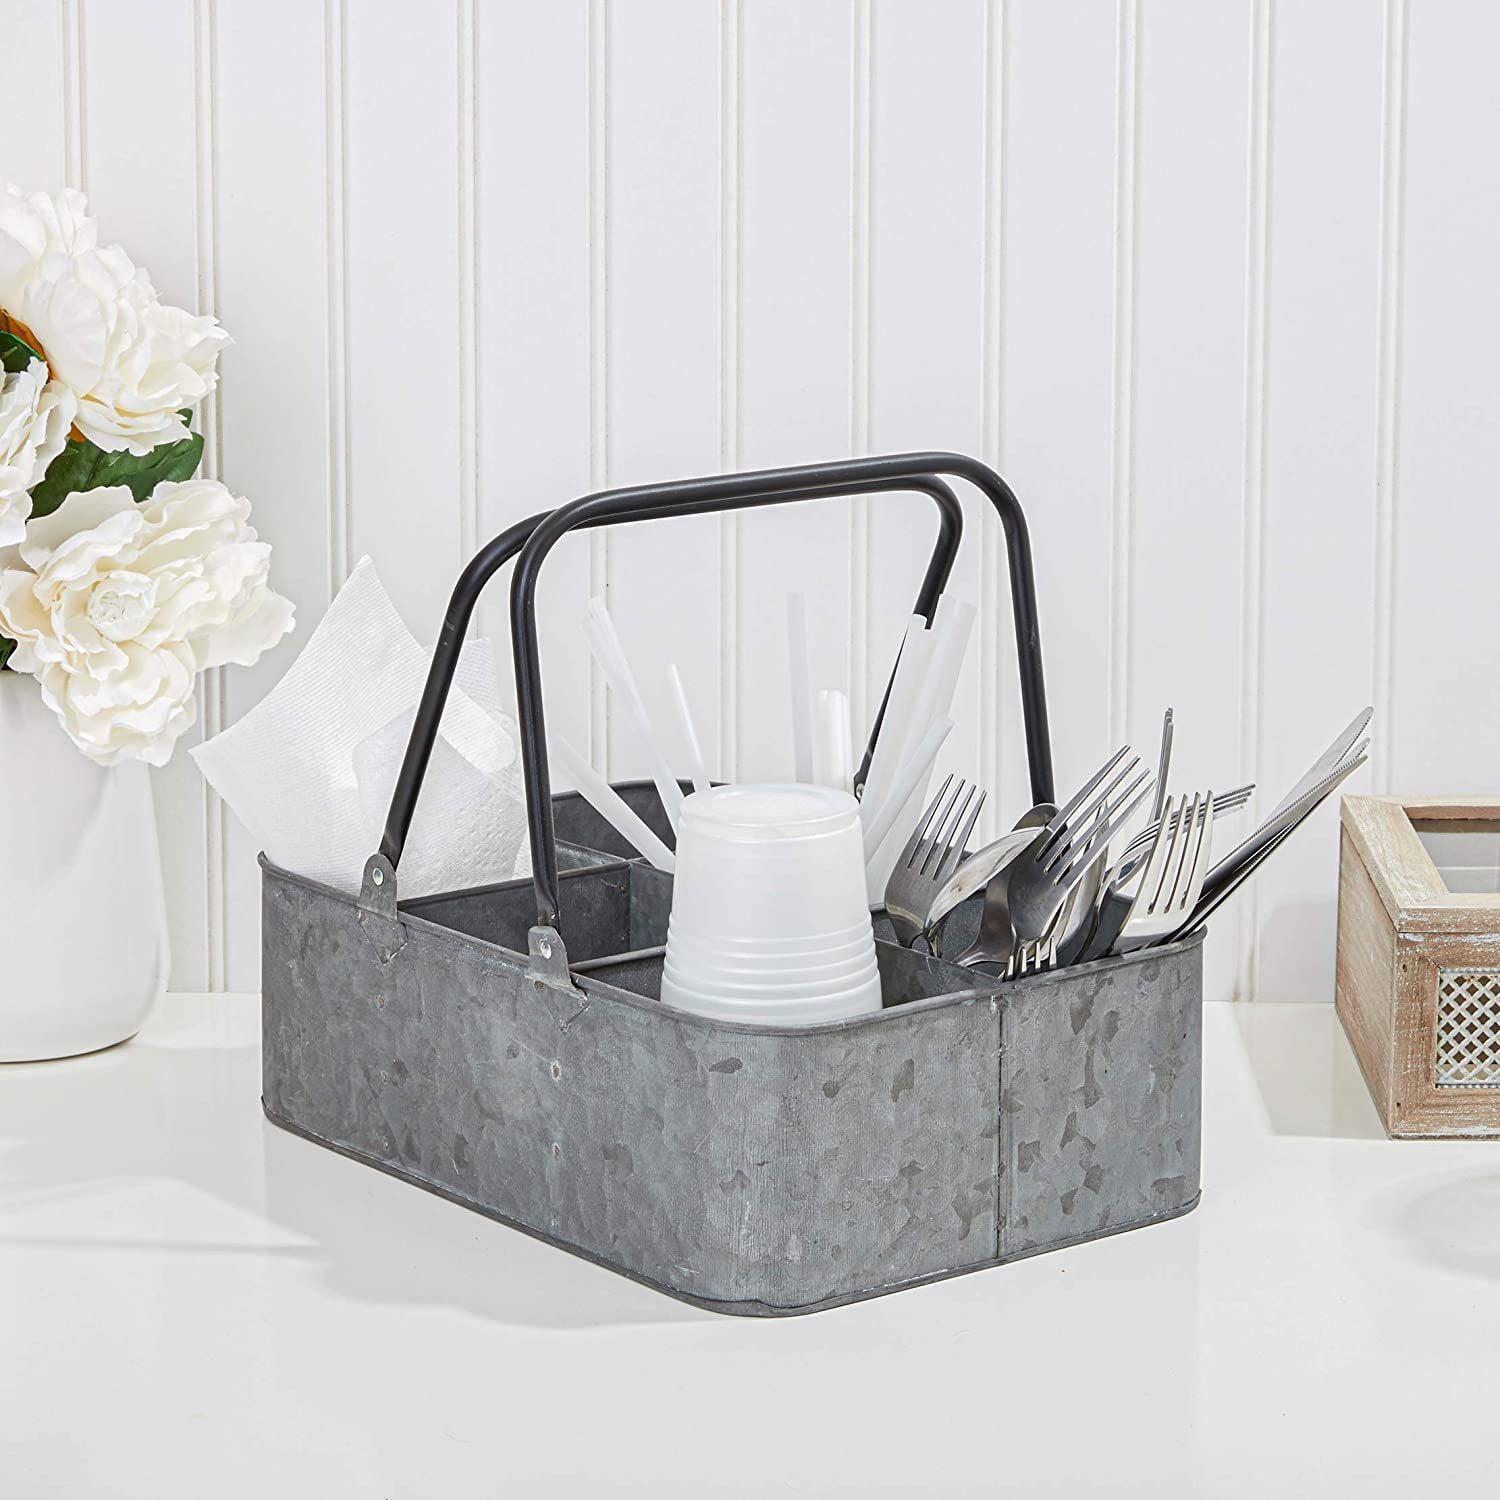 Oval Comfortable Handle HC Elegant Home Galvanized Flatware Caddy Organizer for Kitchen Counter-top/Outdoor Storage Dining Table